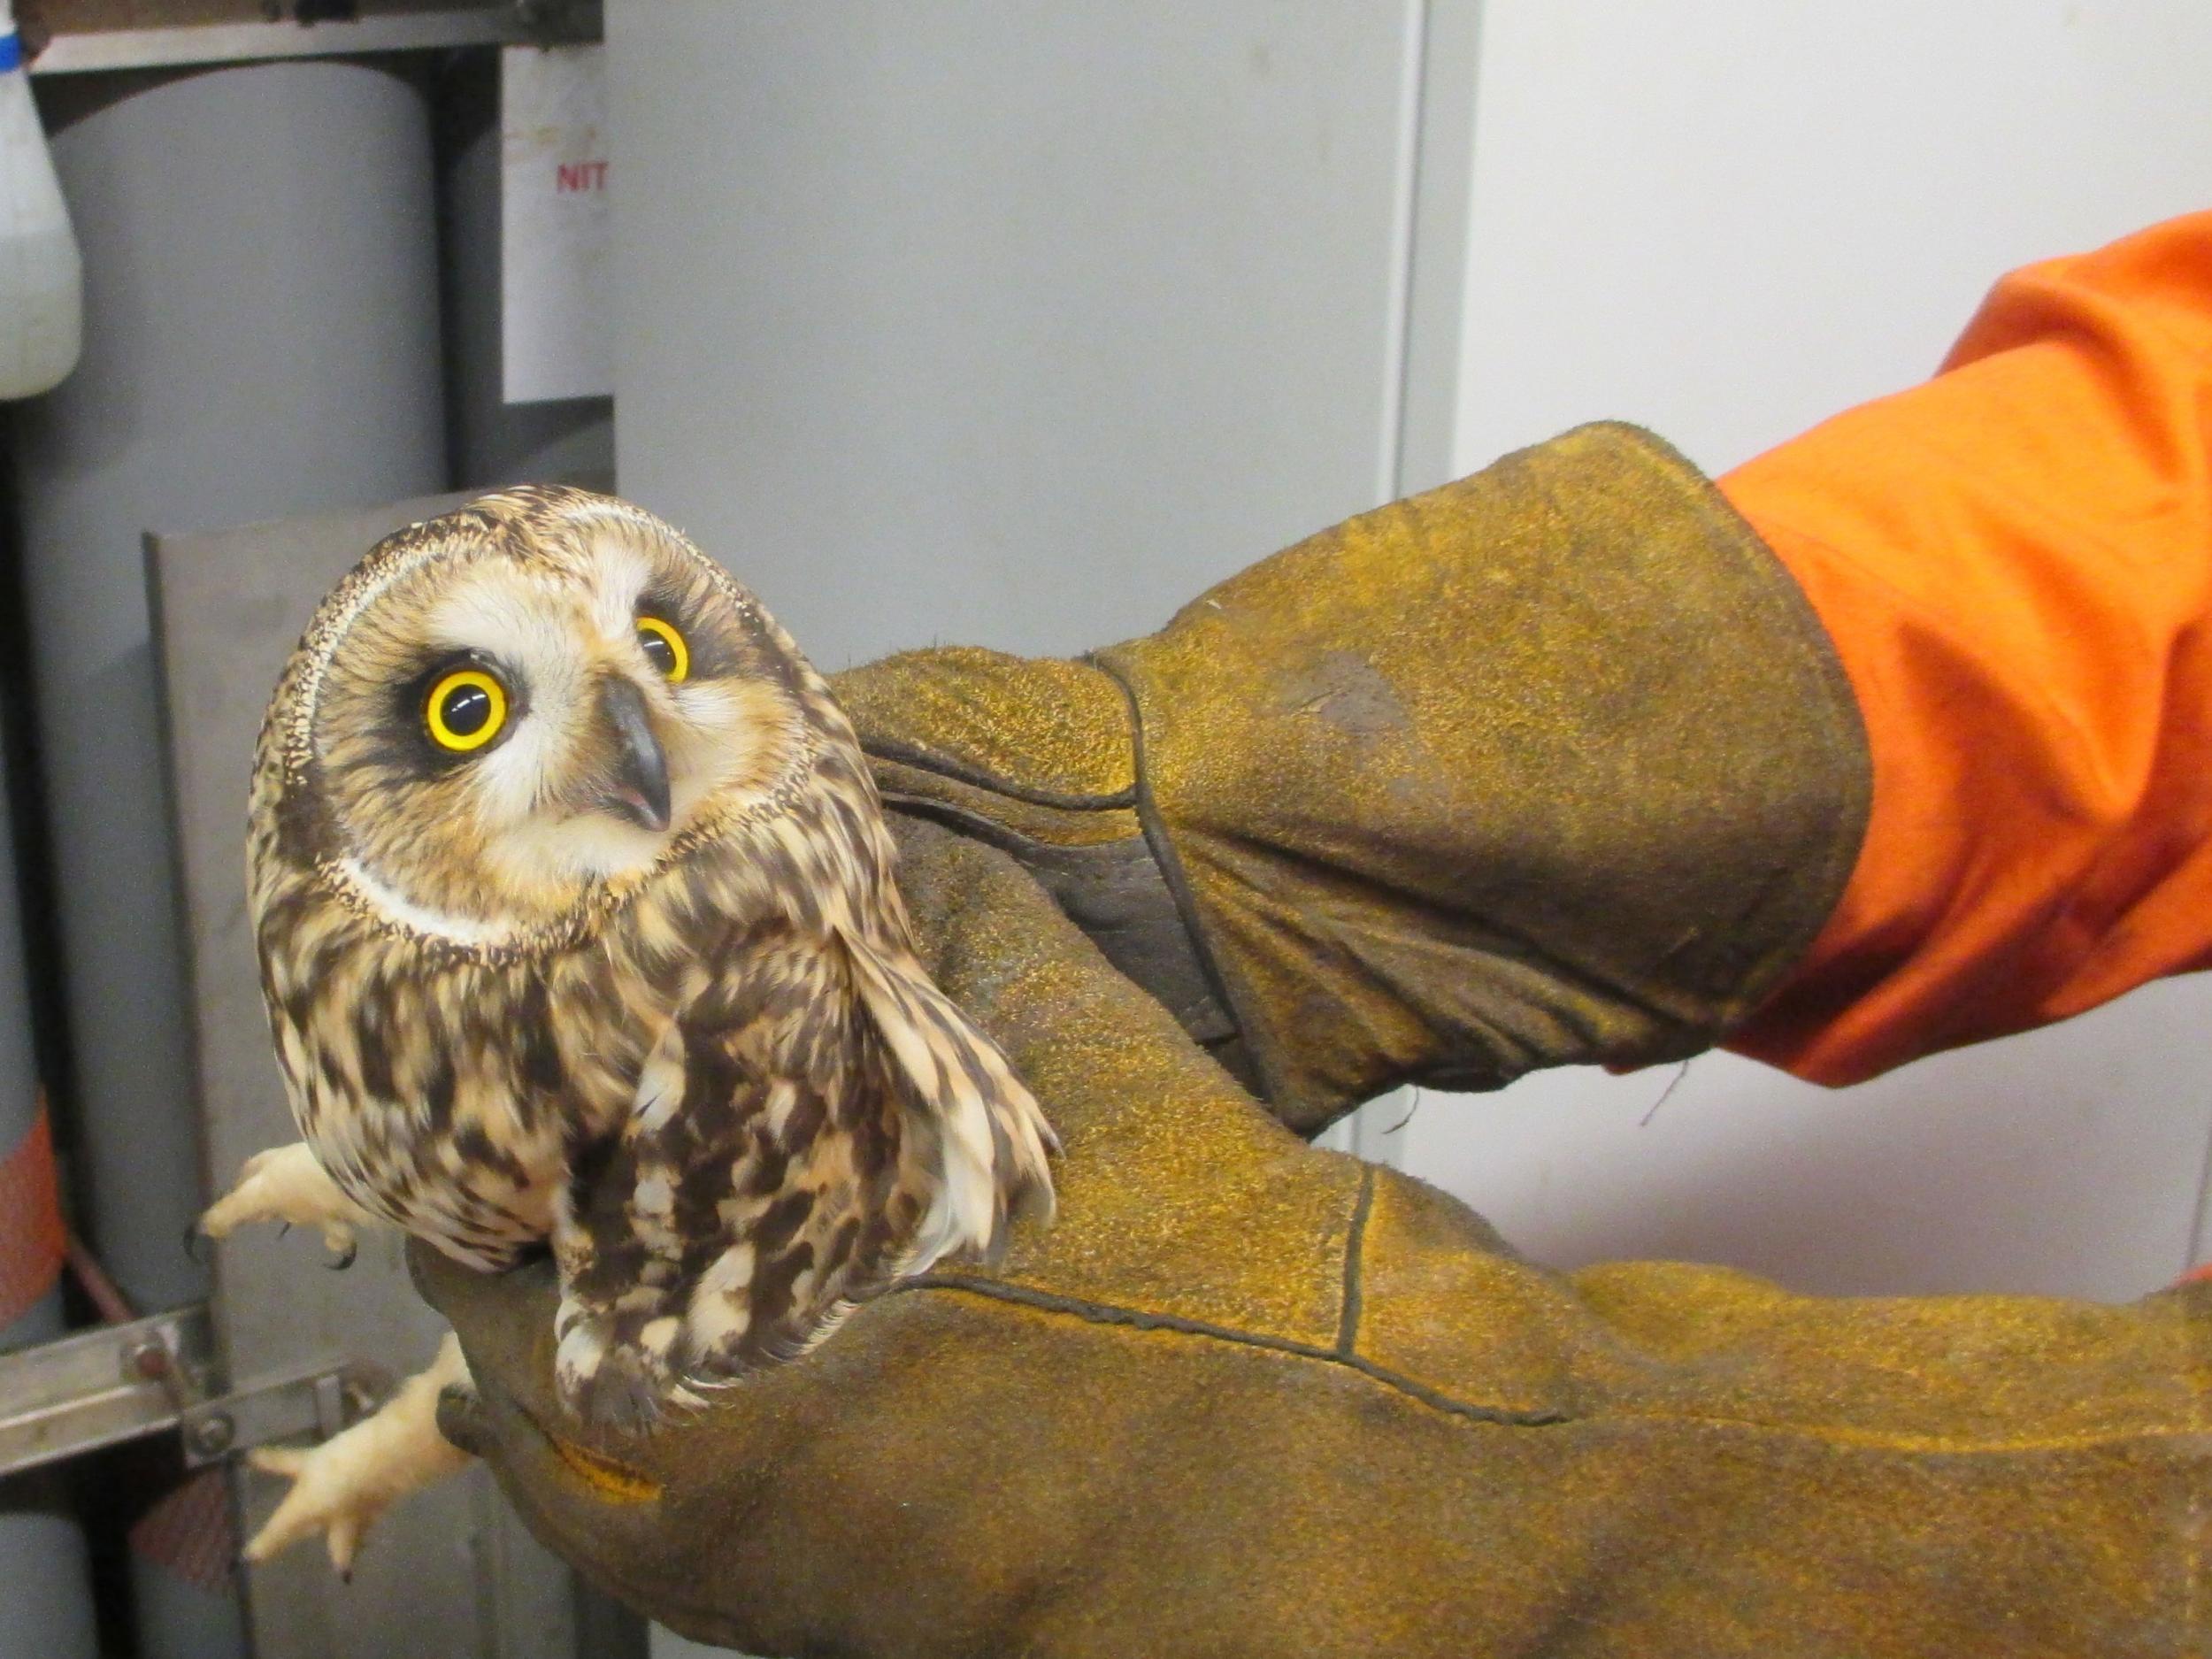 The owl crash-landed on the oil rig